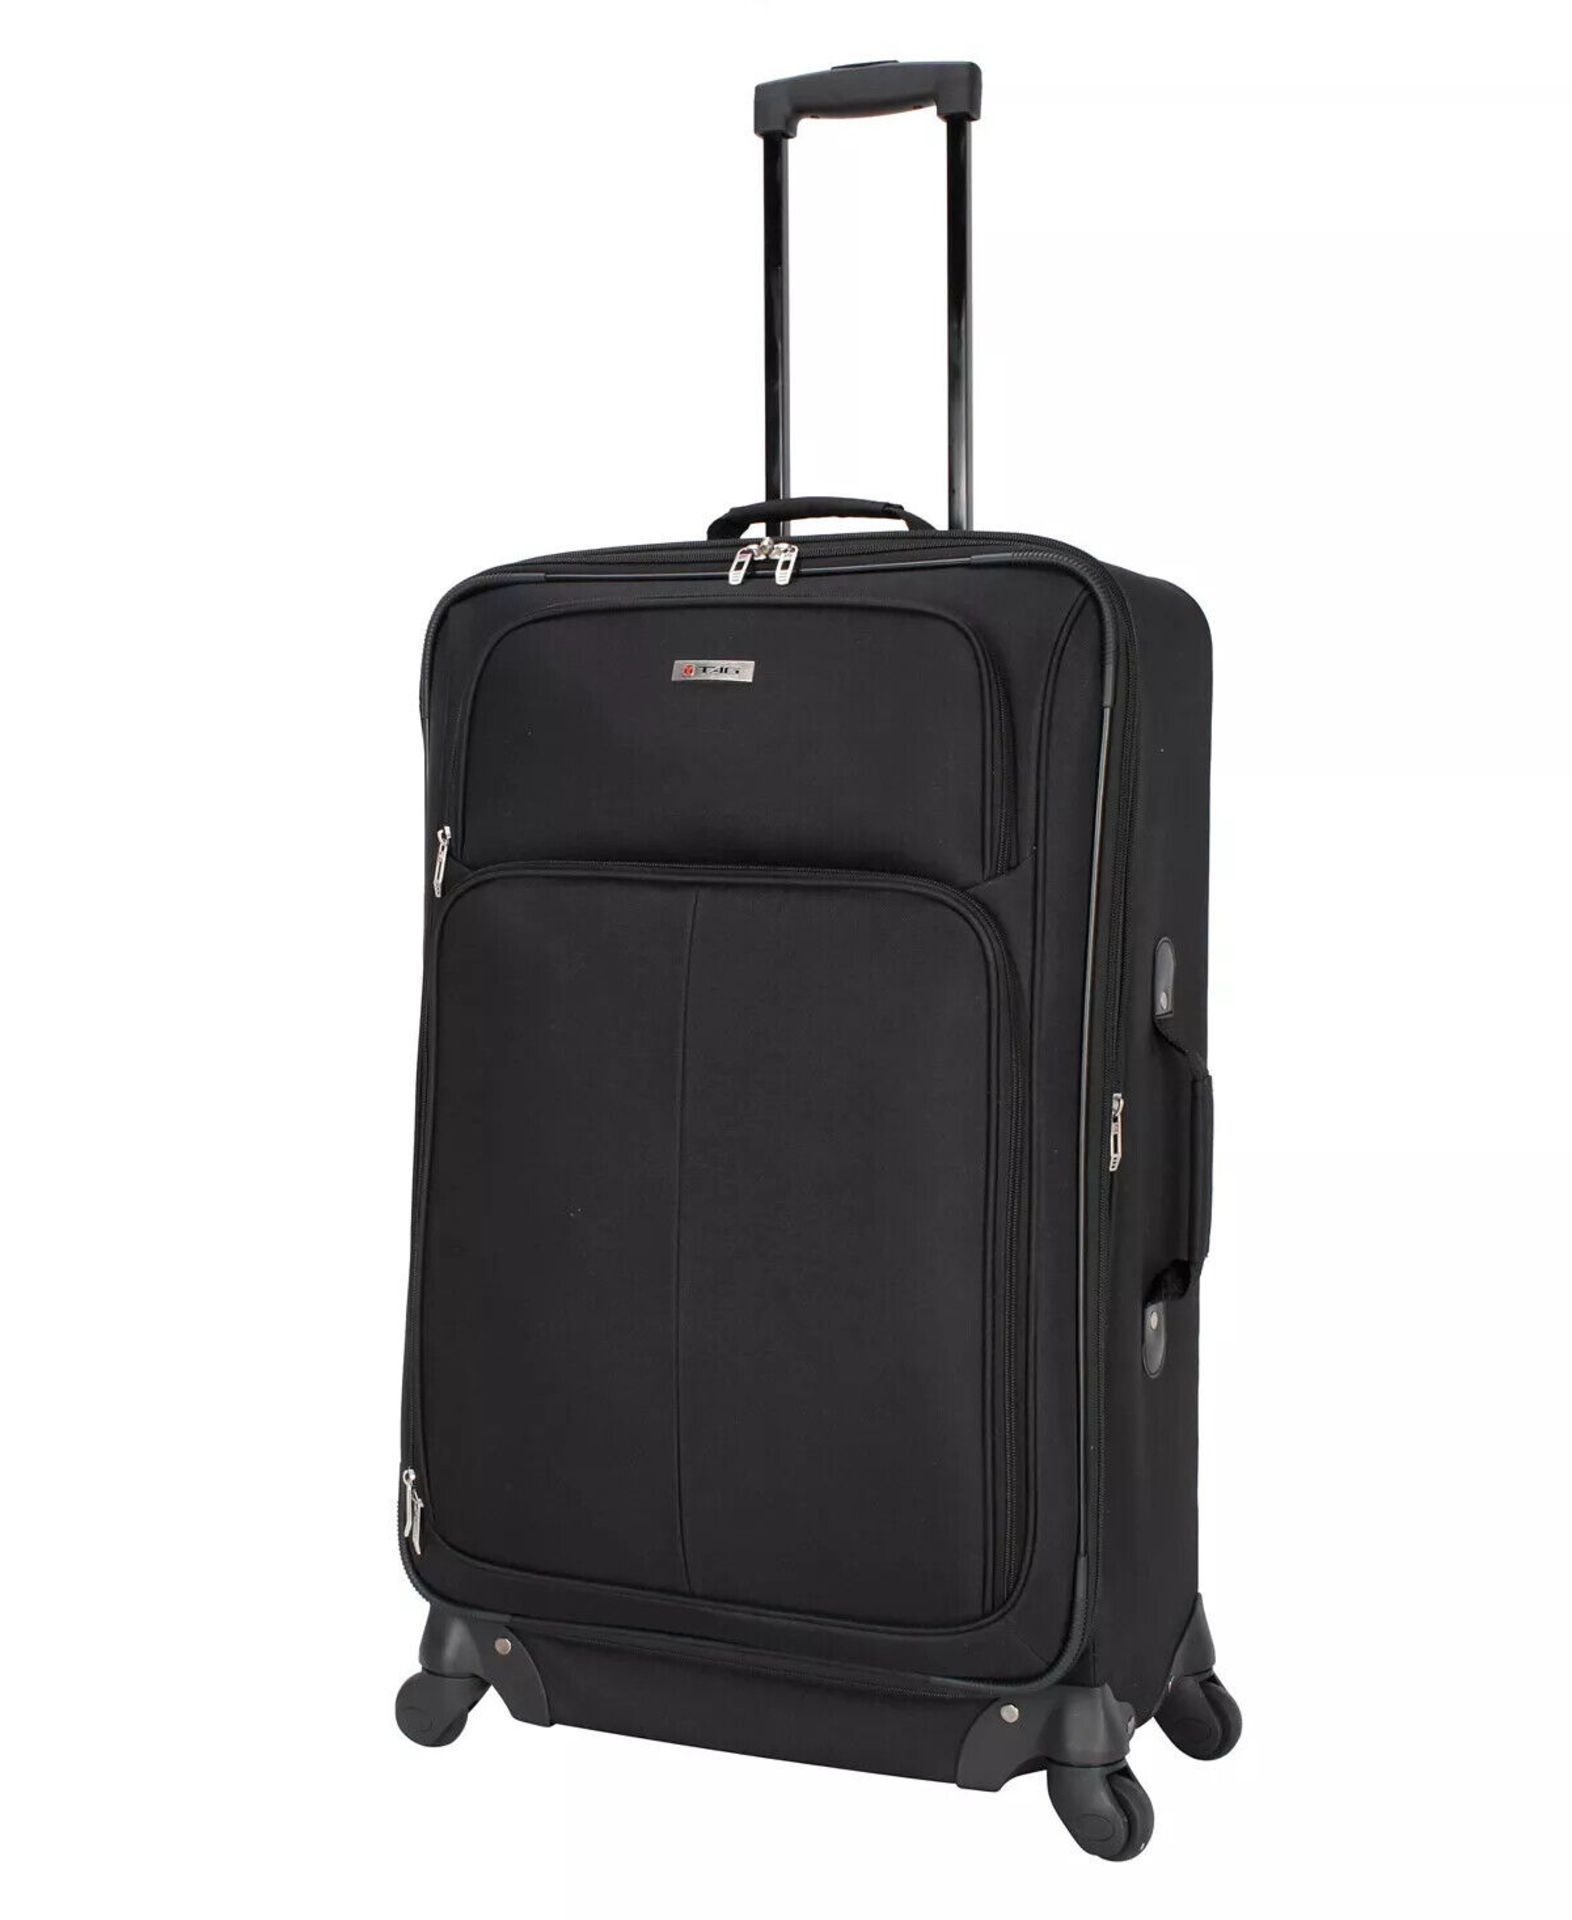 New Set OF TAG Ridgefield Black 5 Piece Softside Luggage Set. RRP $300. This classic set from Tag - Image 5 of 5